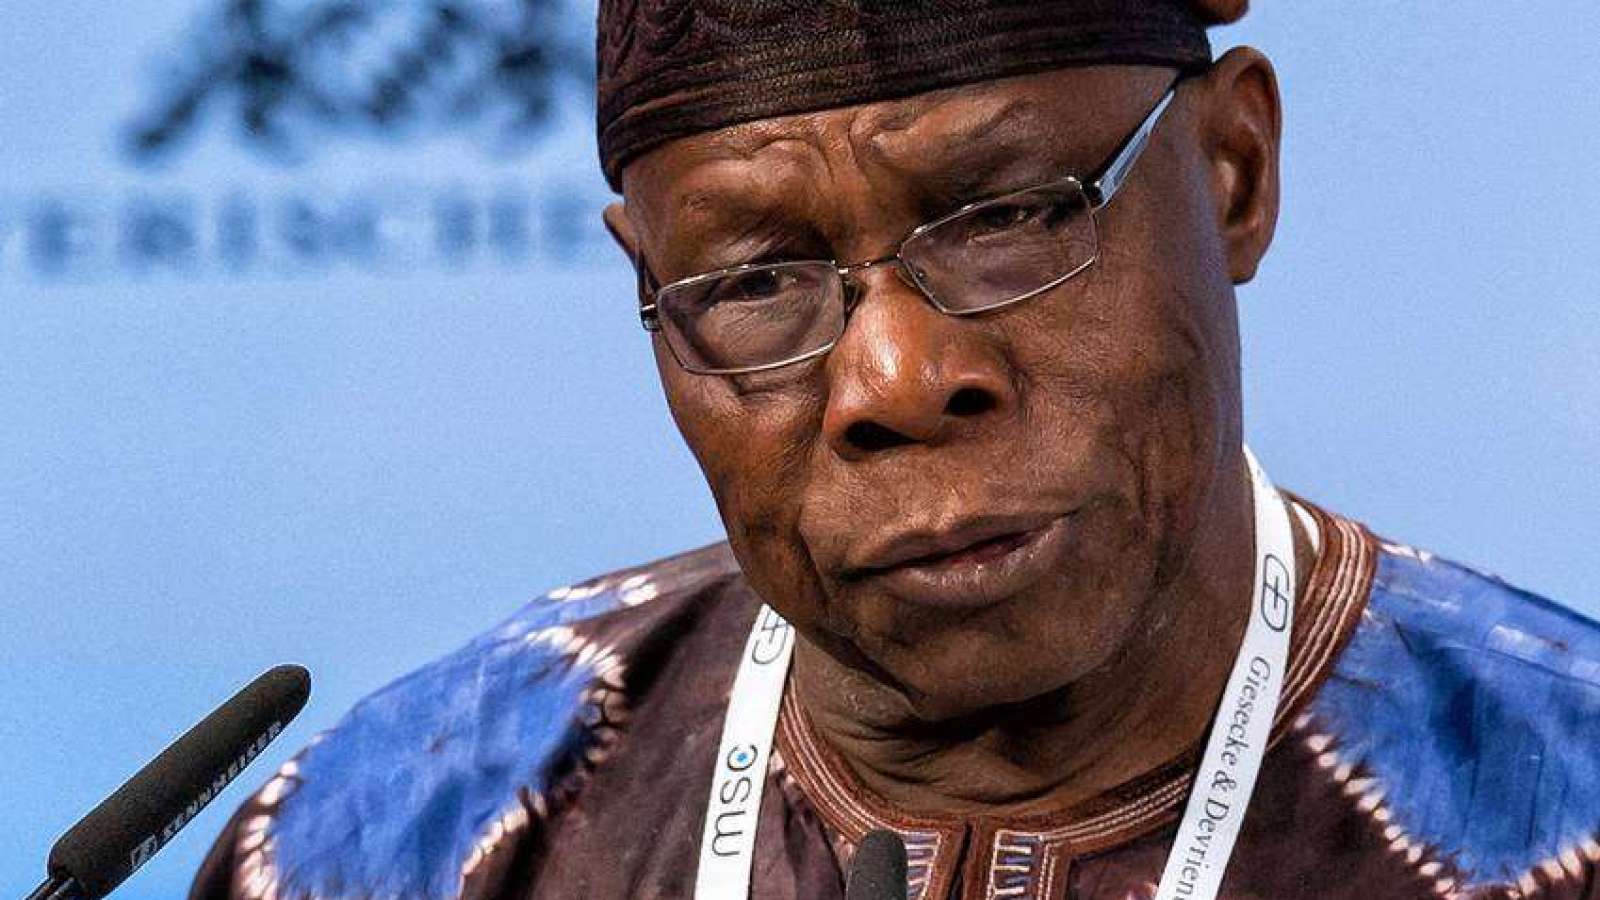 Jesus Christ, The Only Messiah Was Imperfect As Man, And So Is Atiku - Obasanjo 1